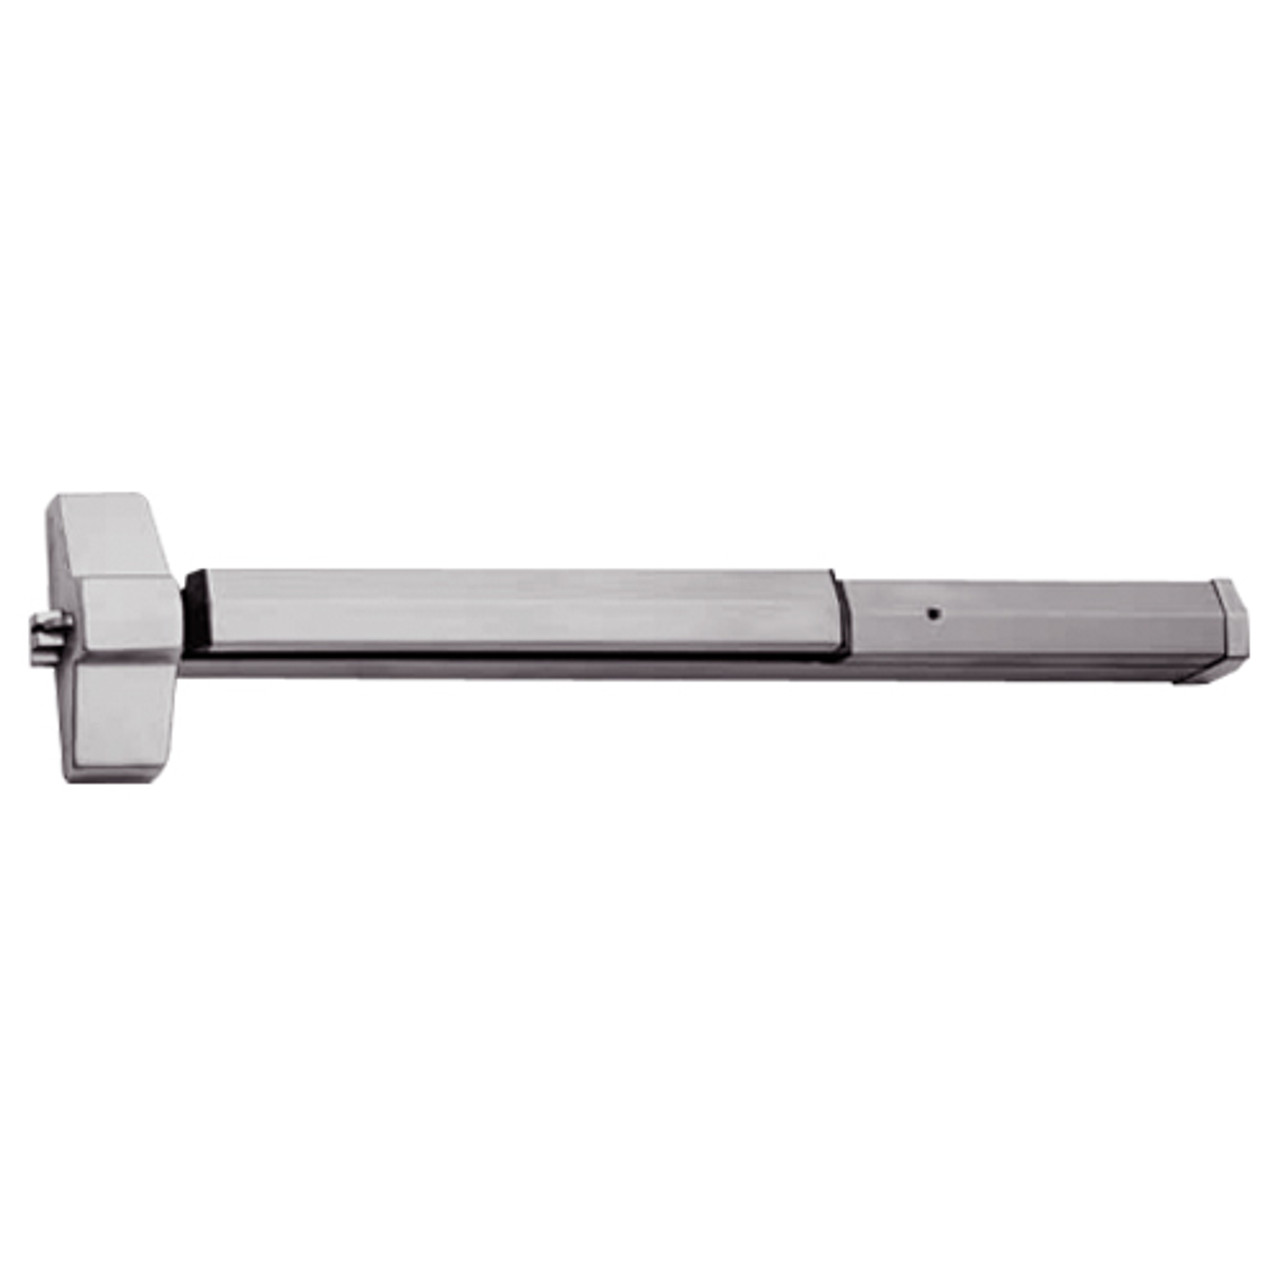 7150-24-630 Yale 7000 Series Non Fire Rated SquareBolt Exit Device in Satin Stainless Steel